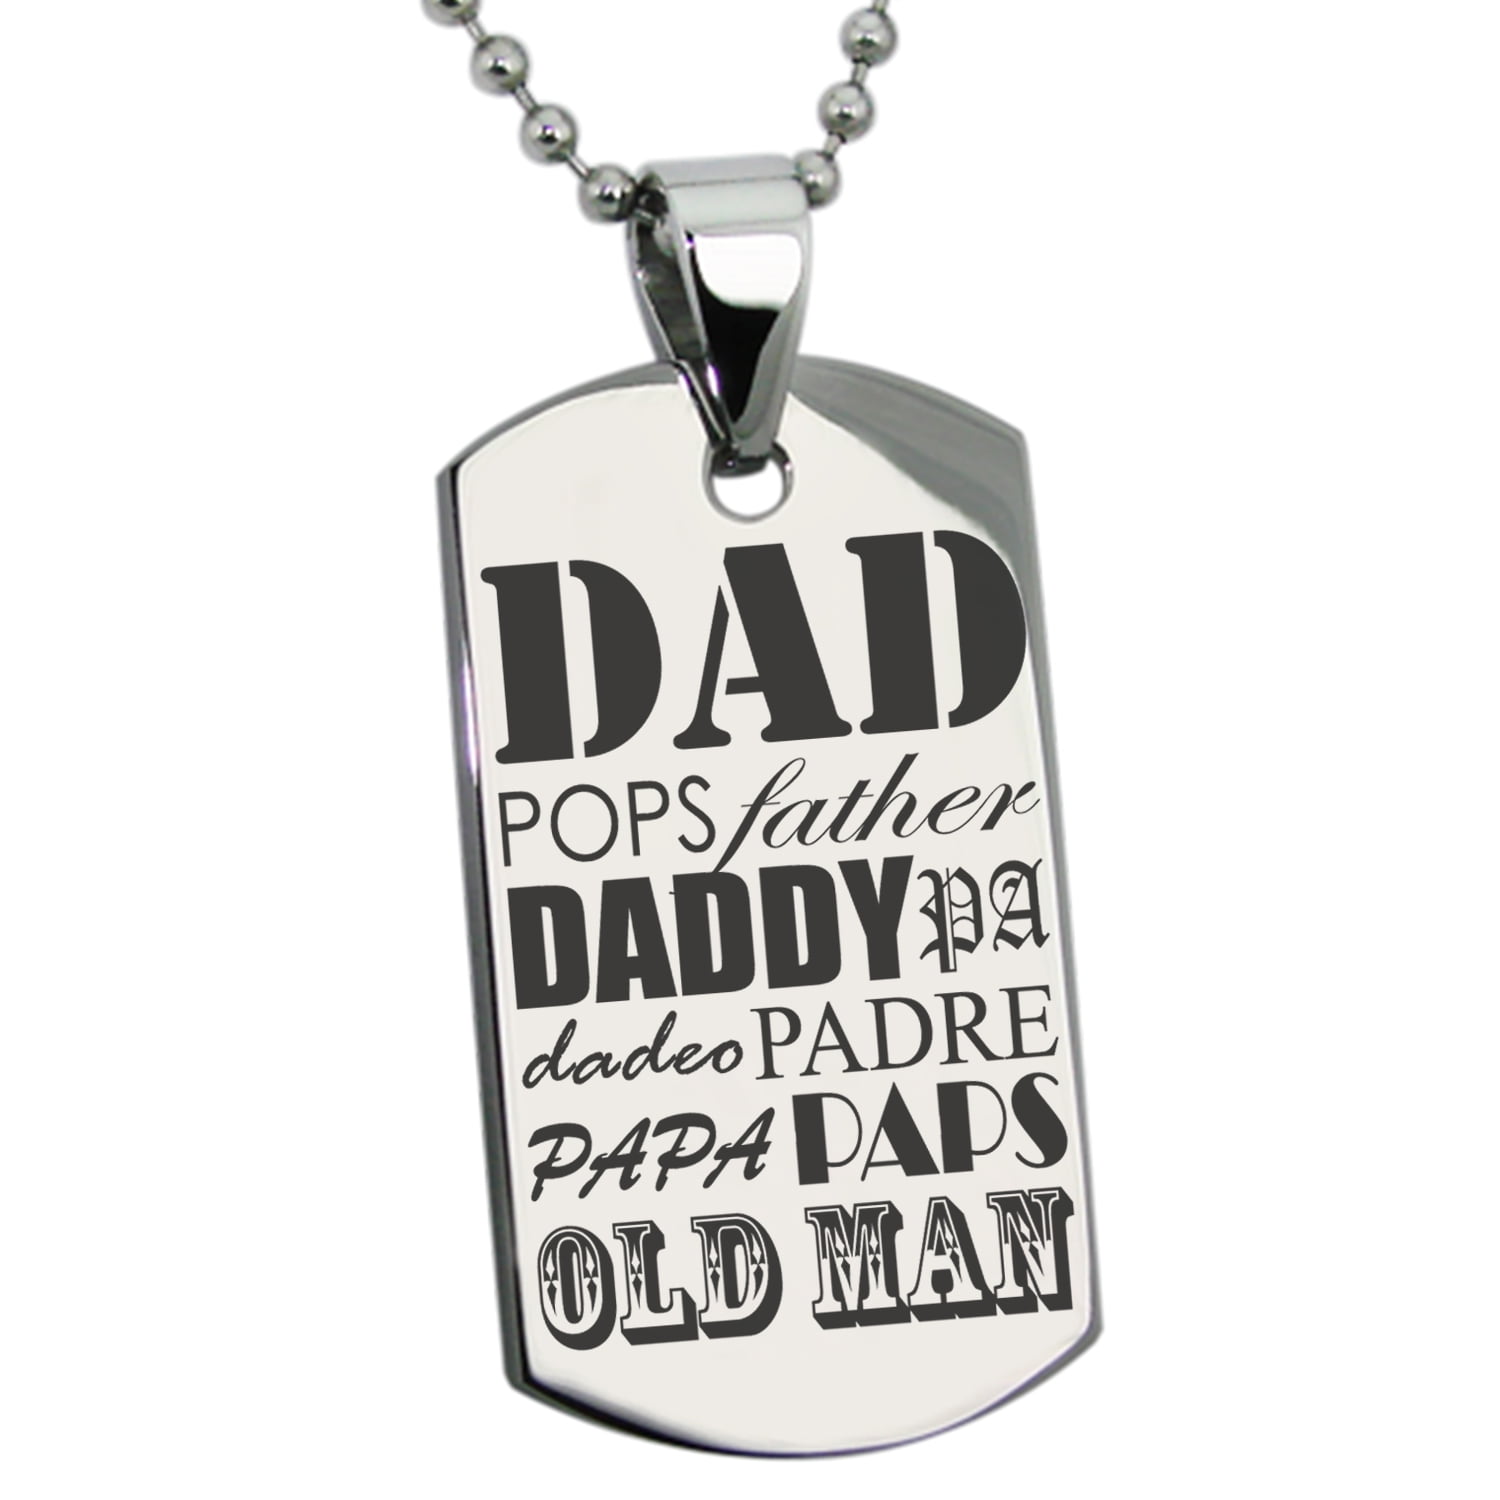 Father's Day Charms Bulk-5pcs Dad You're Someone To Look Up To Charms Polished Stainless Steel Dog Tag Charms Pendants B1471-B1476